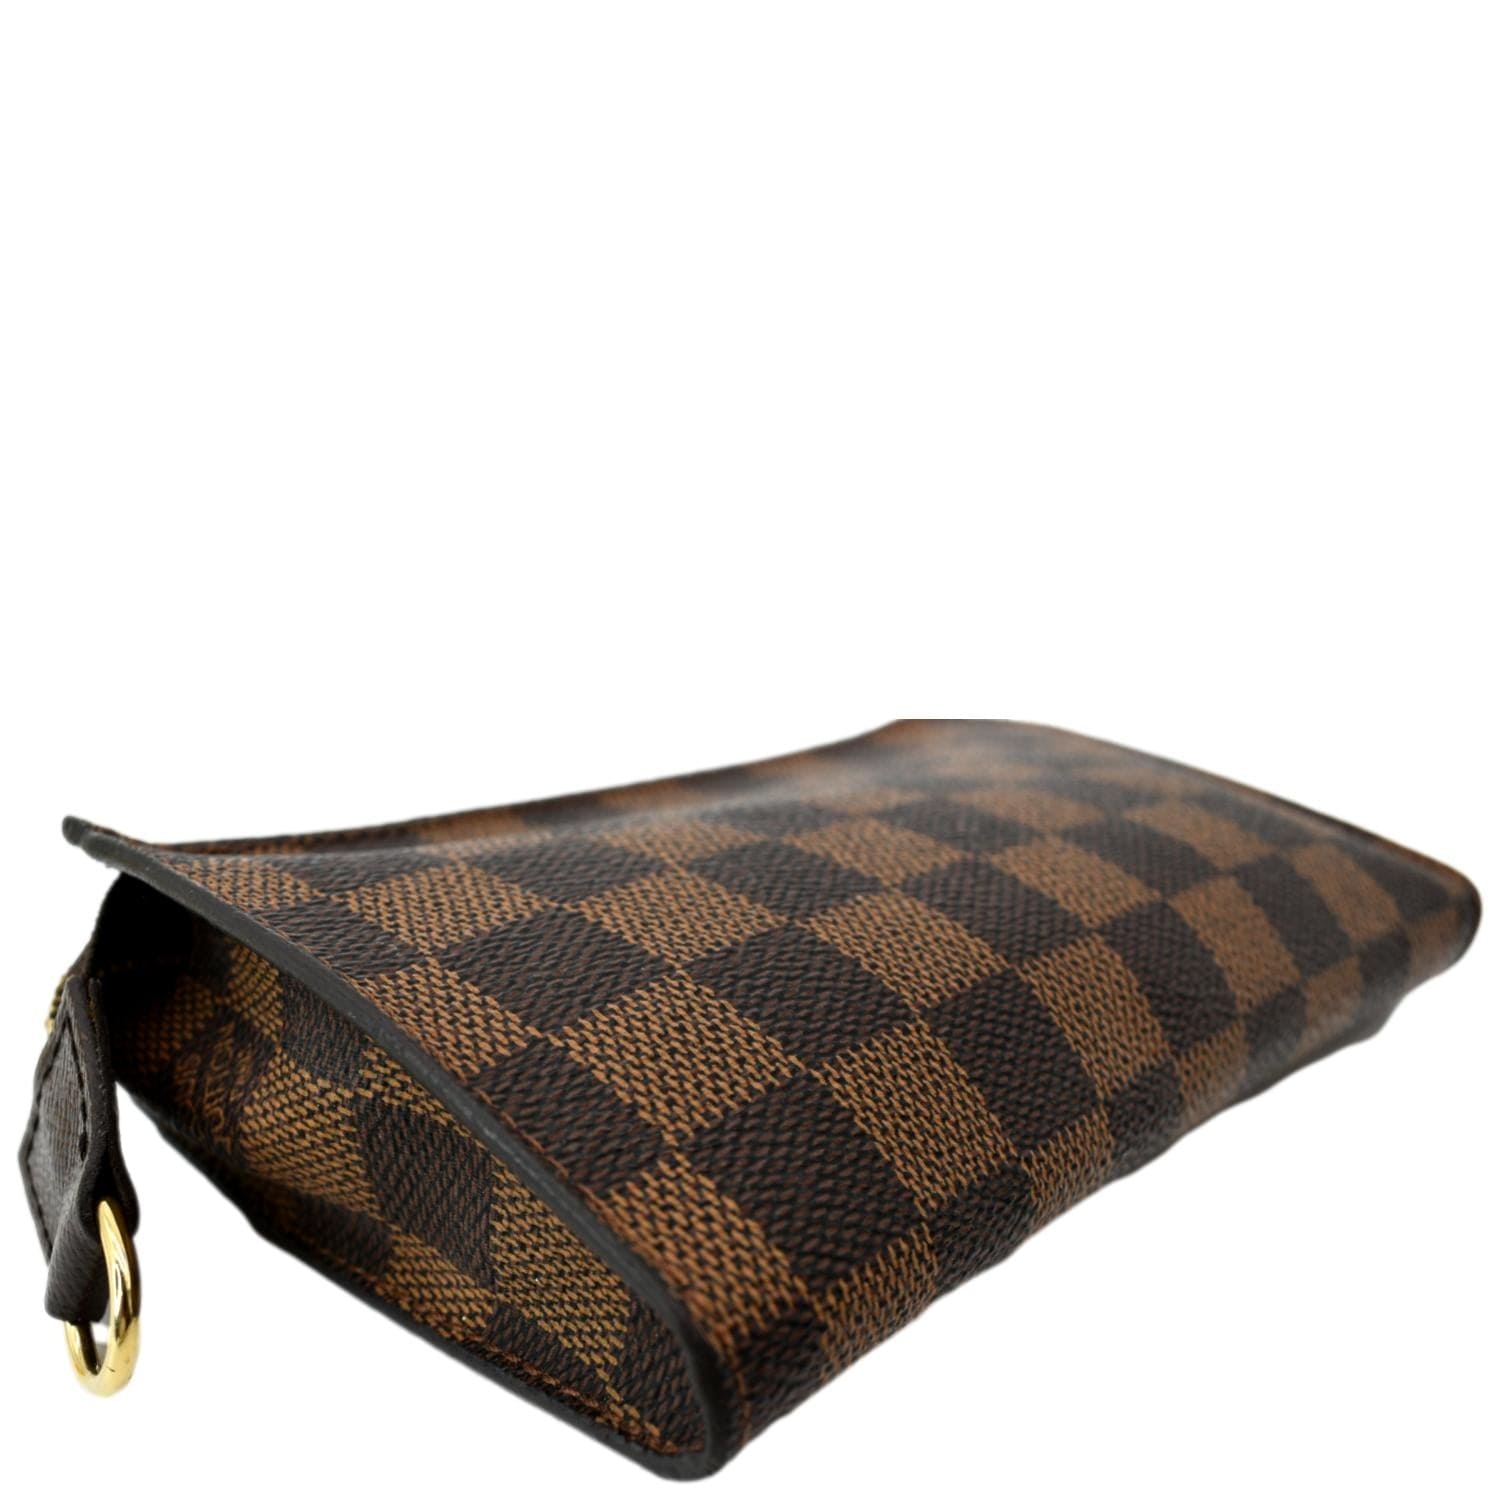 LOUIS VUITTON AUTHENTIC POUCH EBENE Restored interior - funny pack